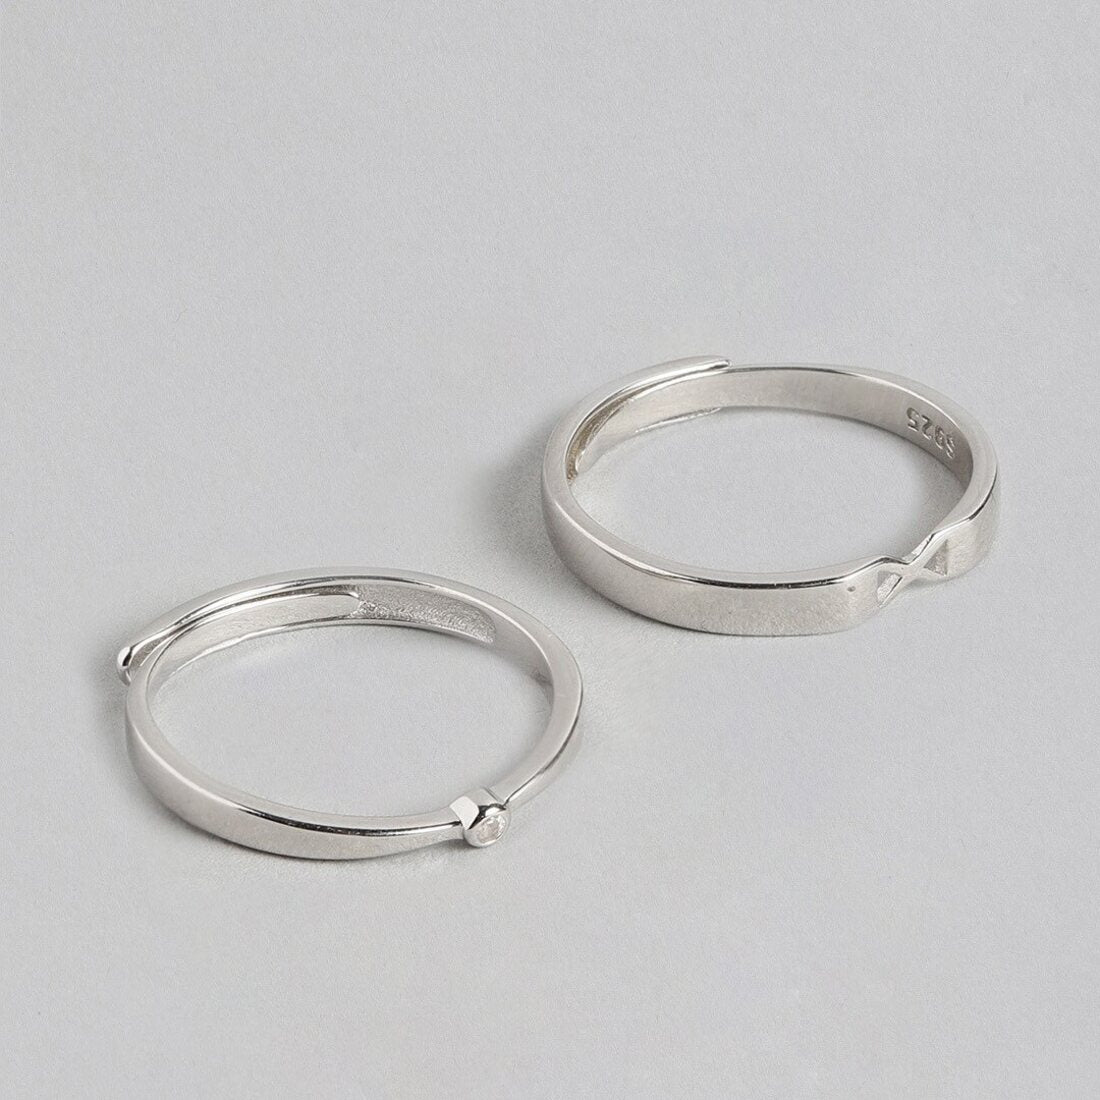 Sweethearts 925 Silver Couple Rings (Adjustable)